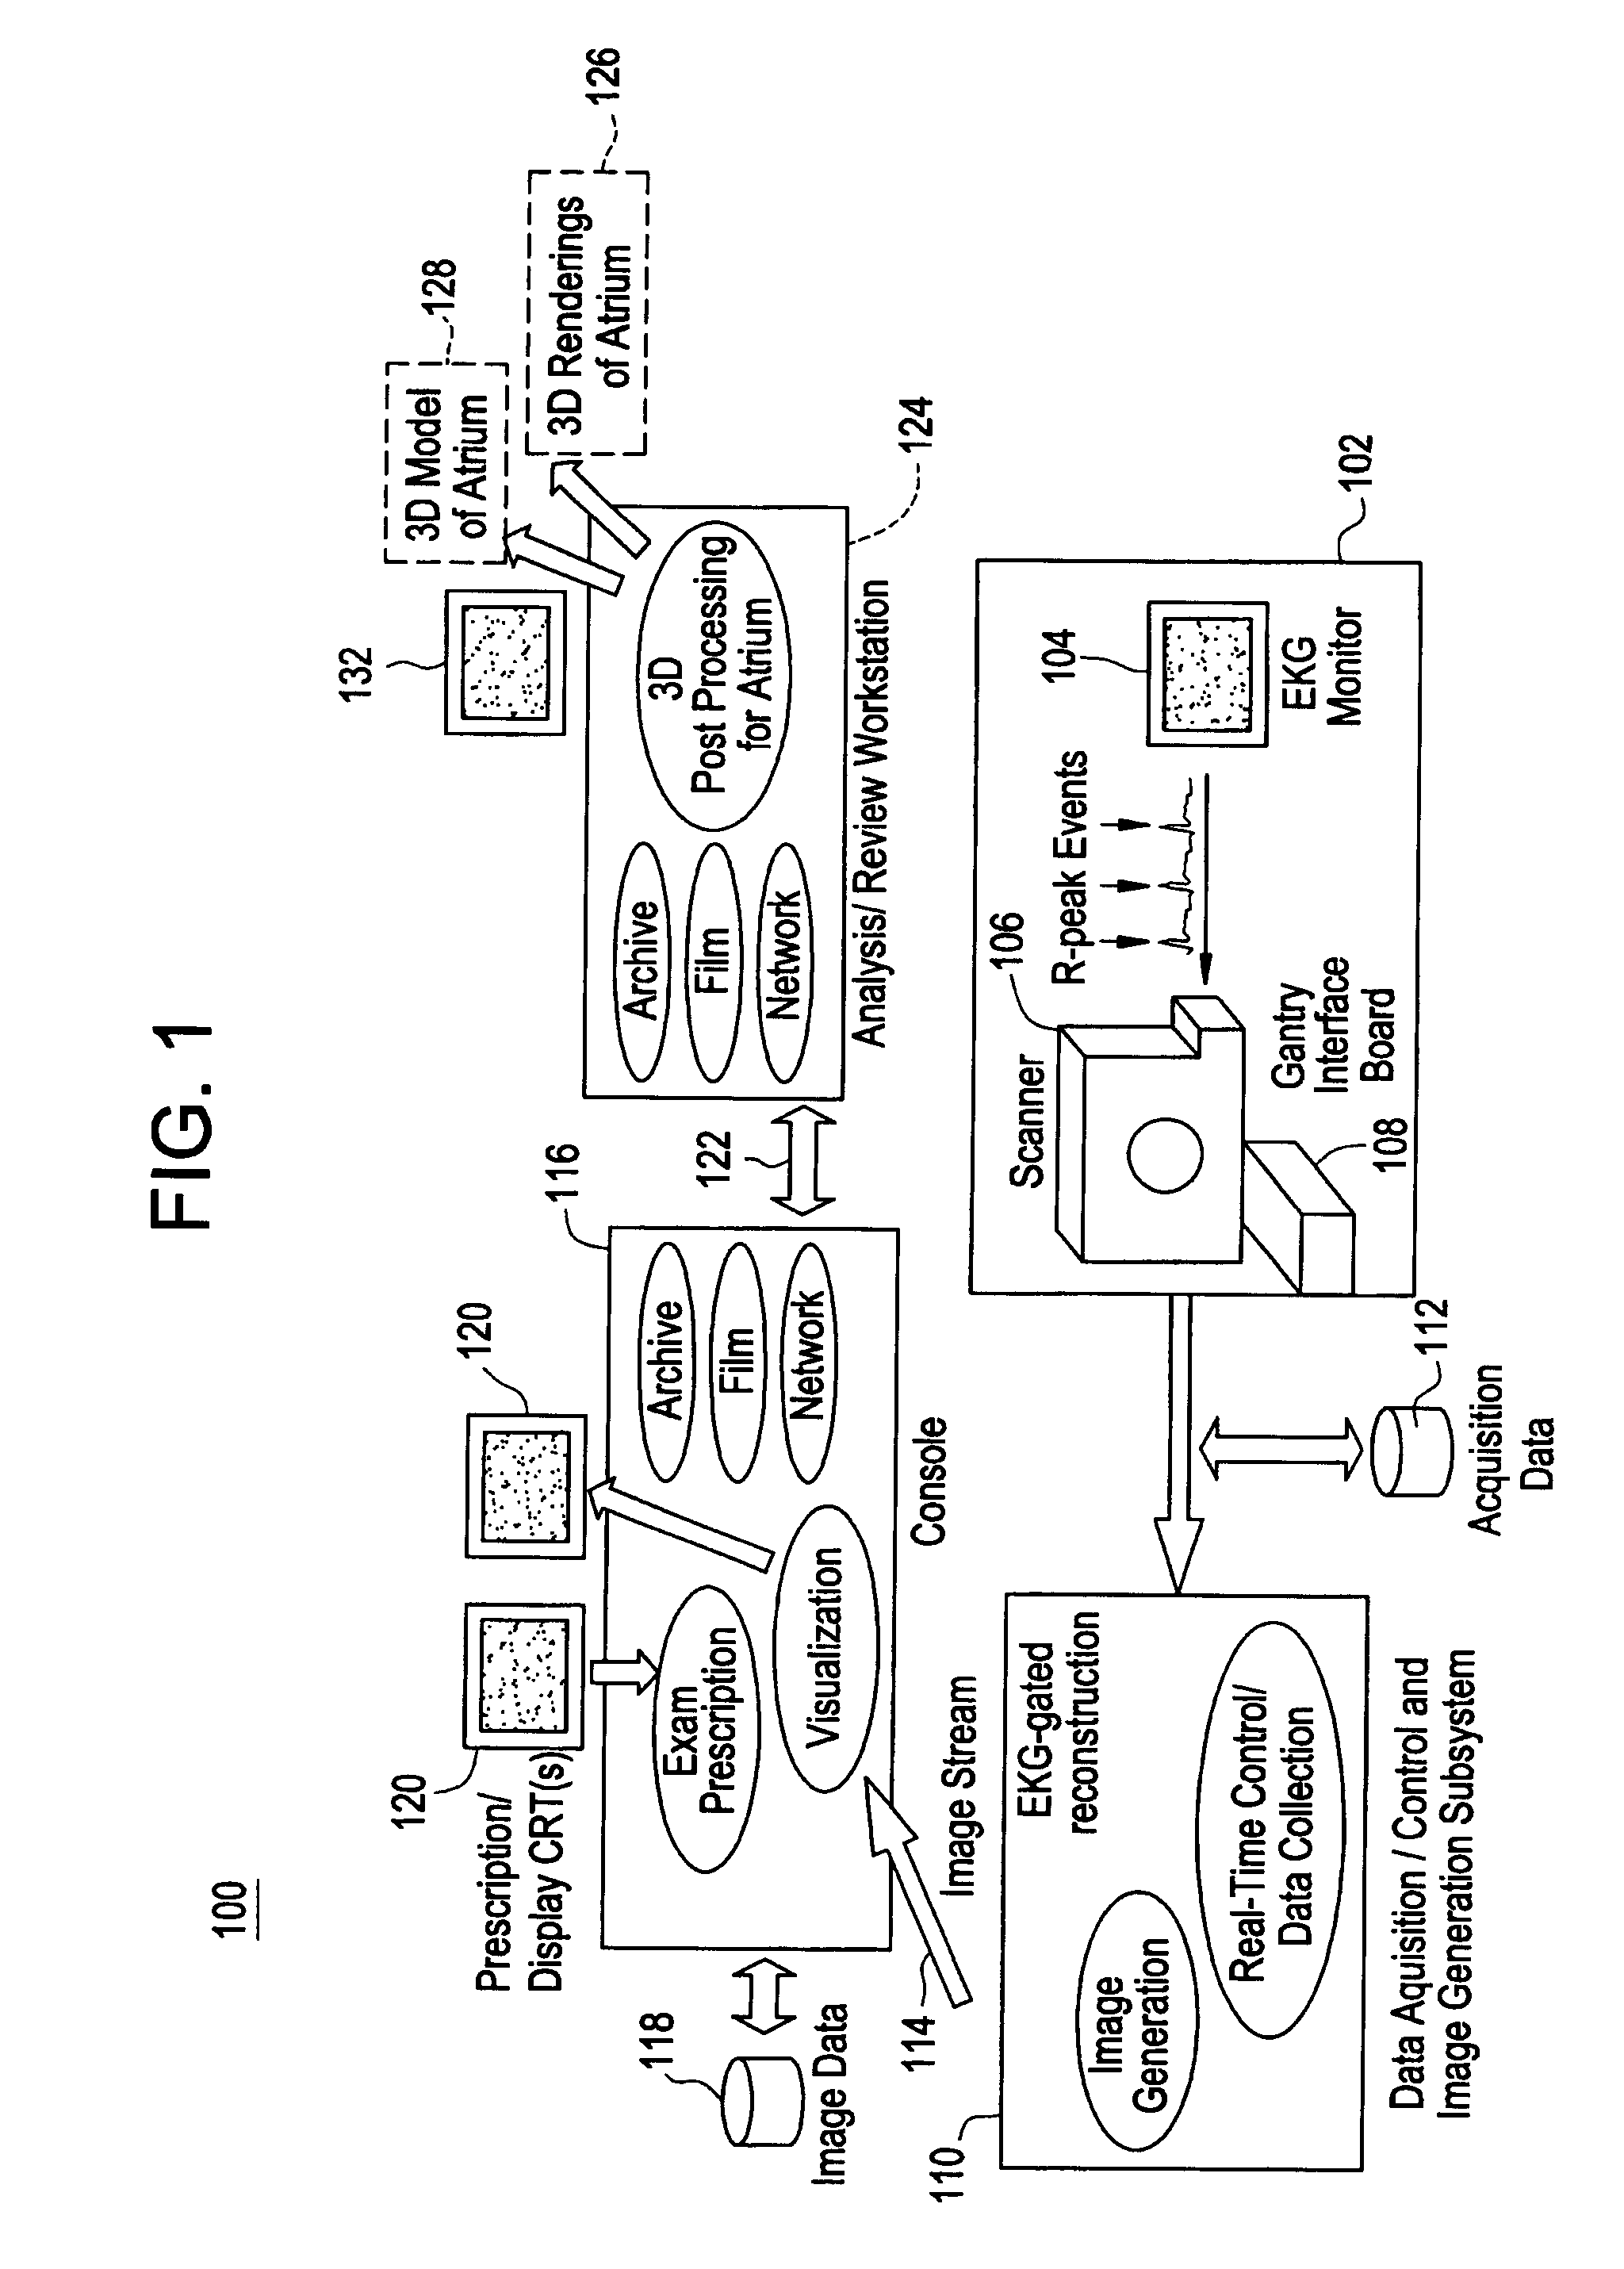 Cardiac CT system and method for planning atrial fibrillation intervention